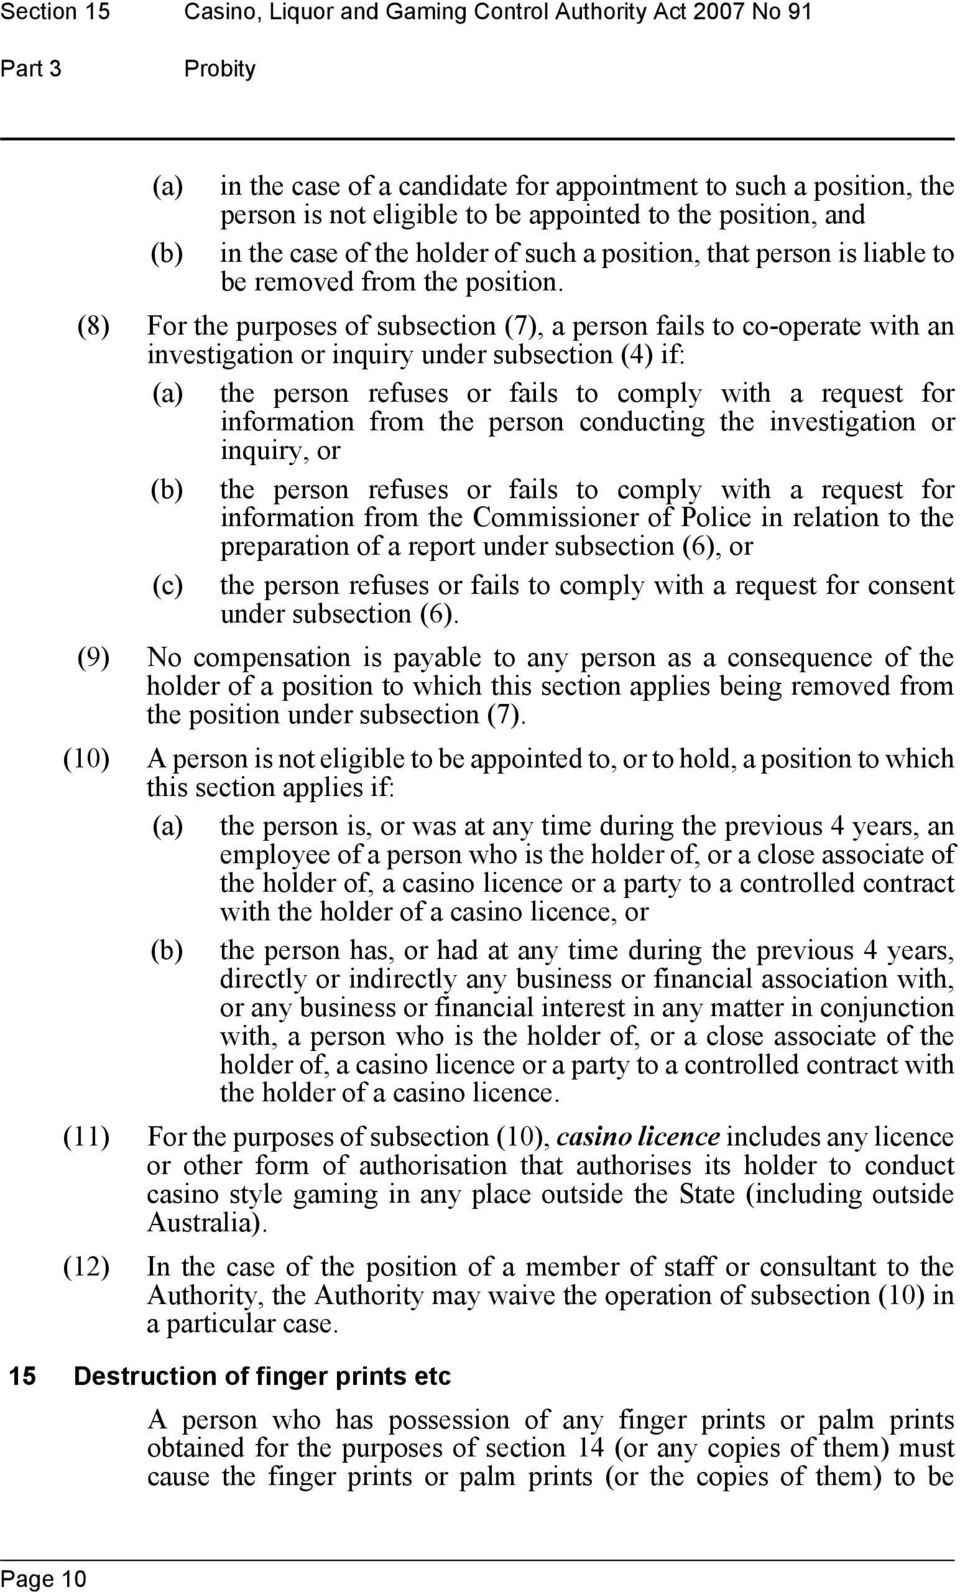 (8) For the purposes of subsection (7), a person fails to co-operate with an investigation or inquiry under subsection (4) if: (a) the person refuses or fails to comply with a request for information